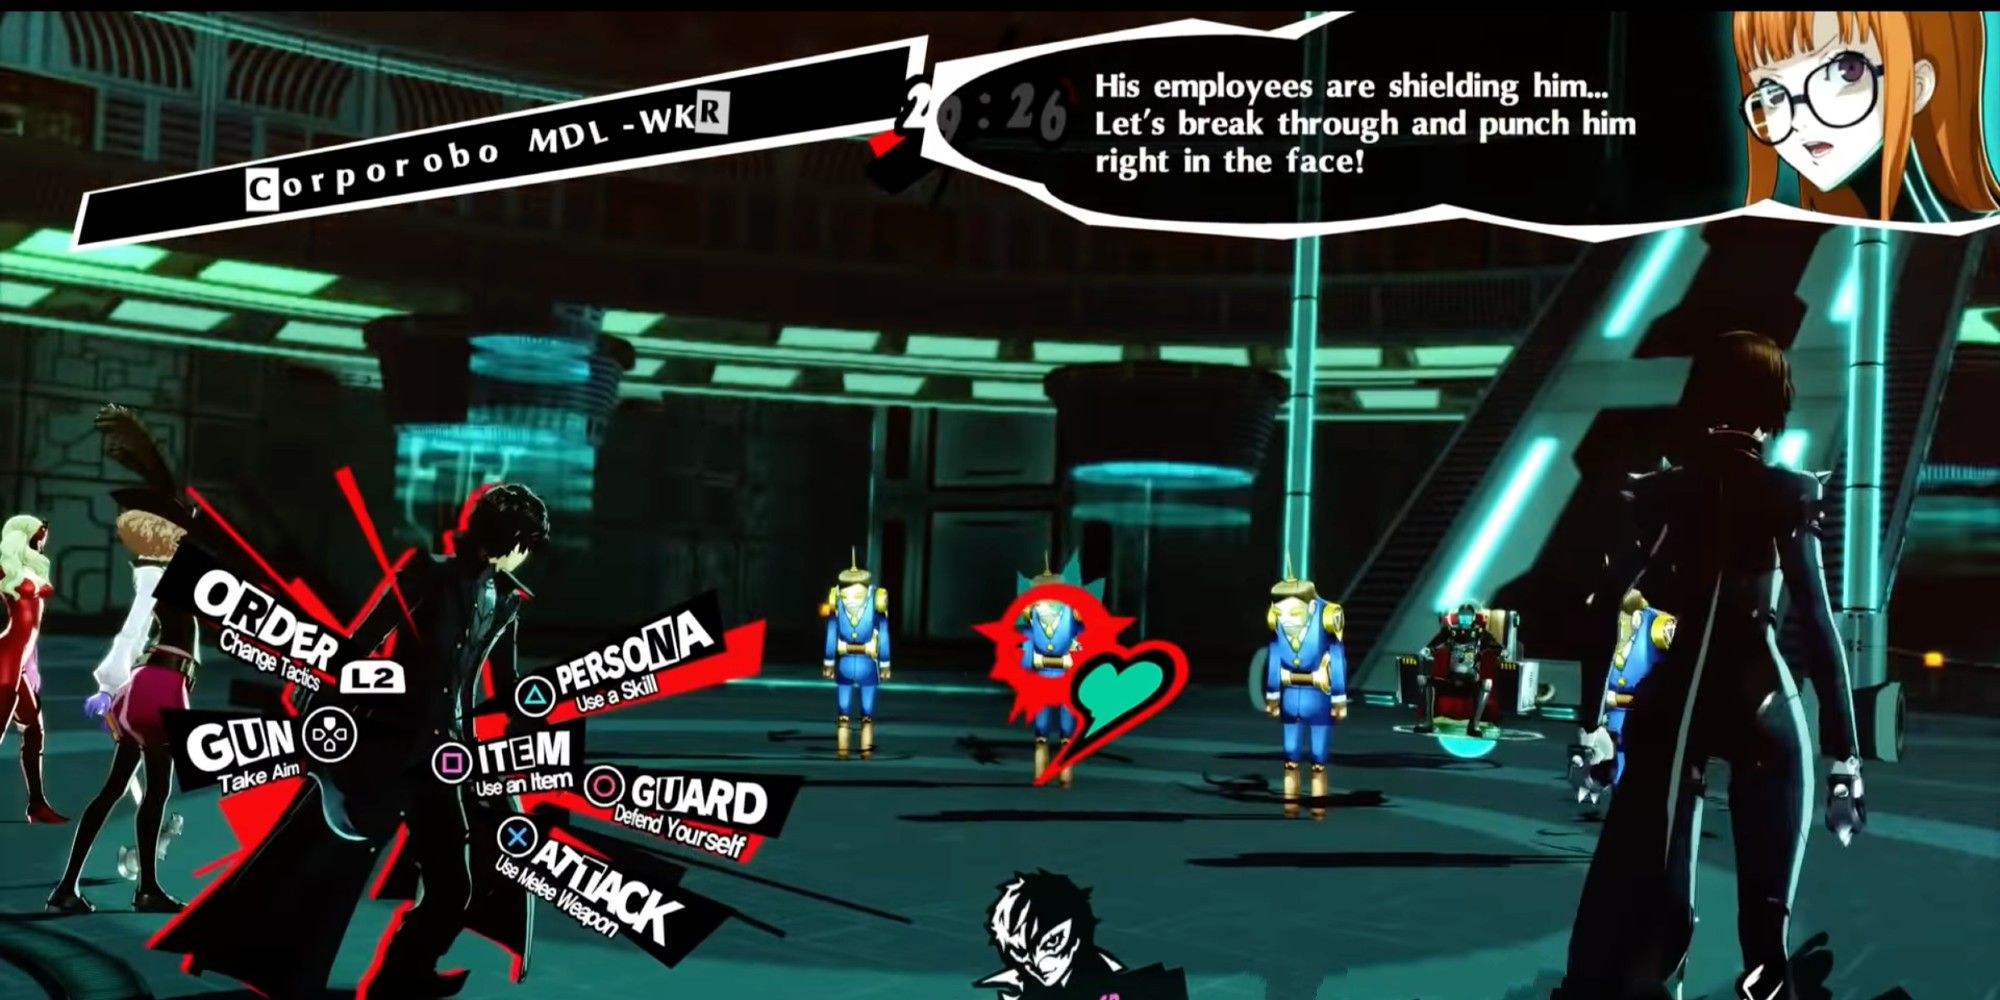 Shadow Okumura's robot employees are defending him from the party- Persona 5